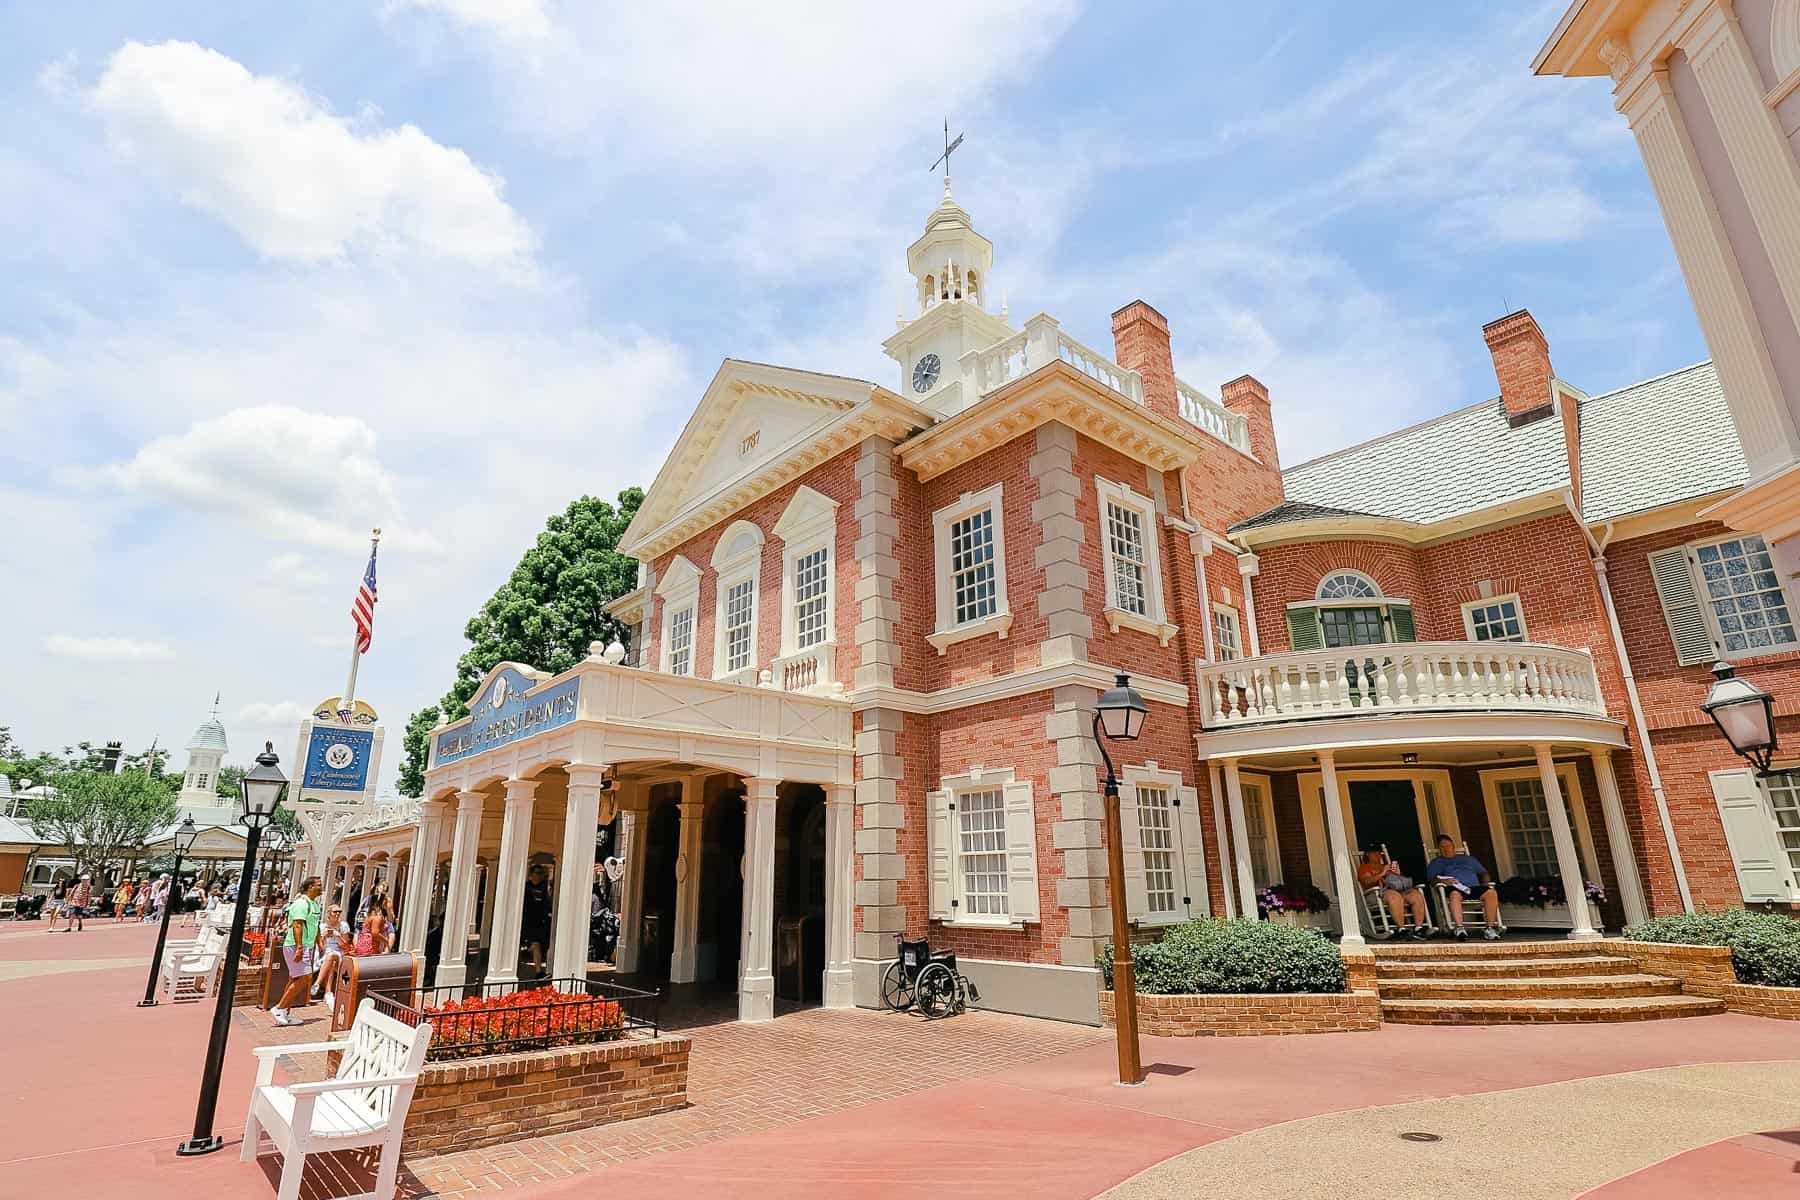 The Hall of Presidents has a colonial exterior similar to the time period of Liberty Square. 